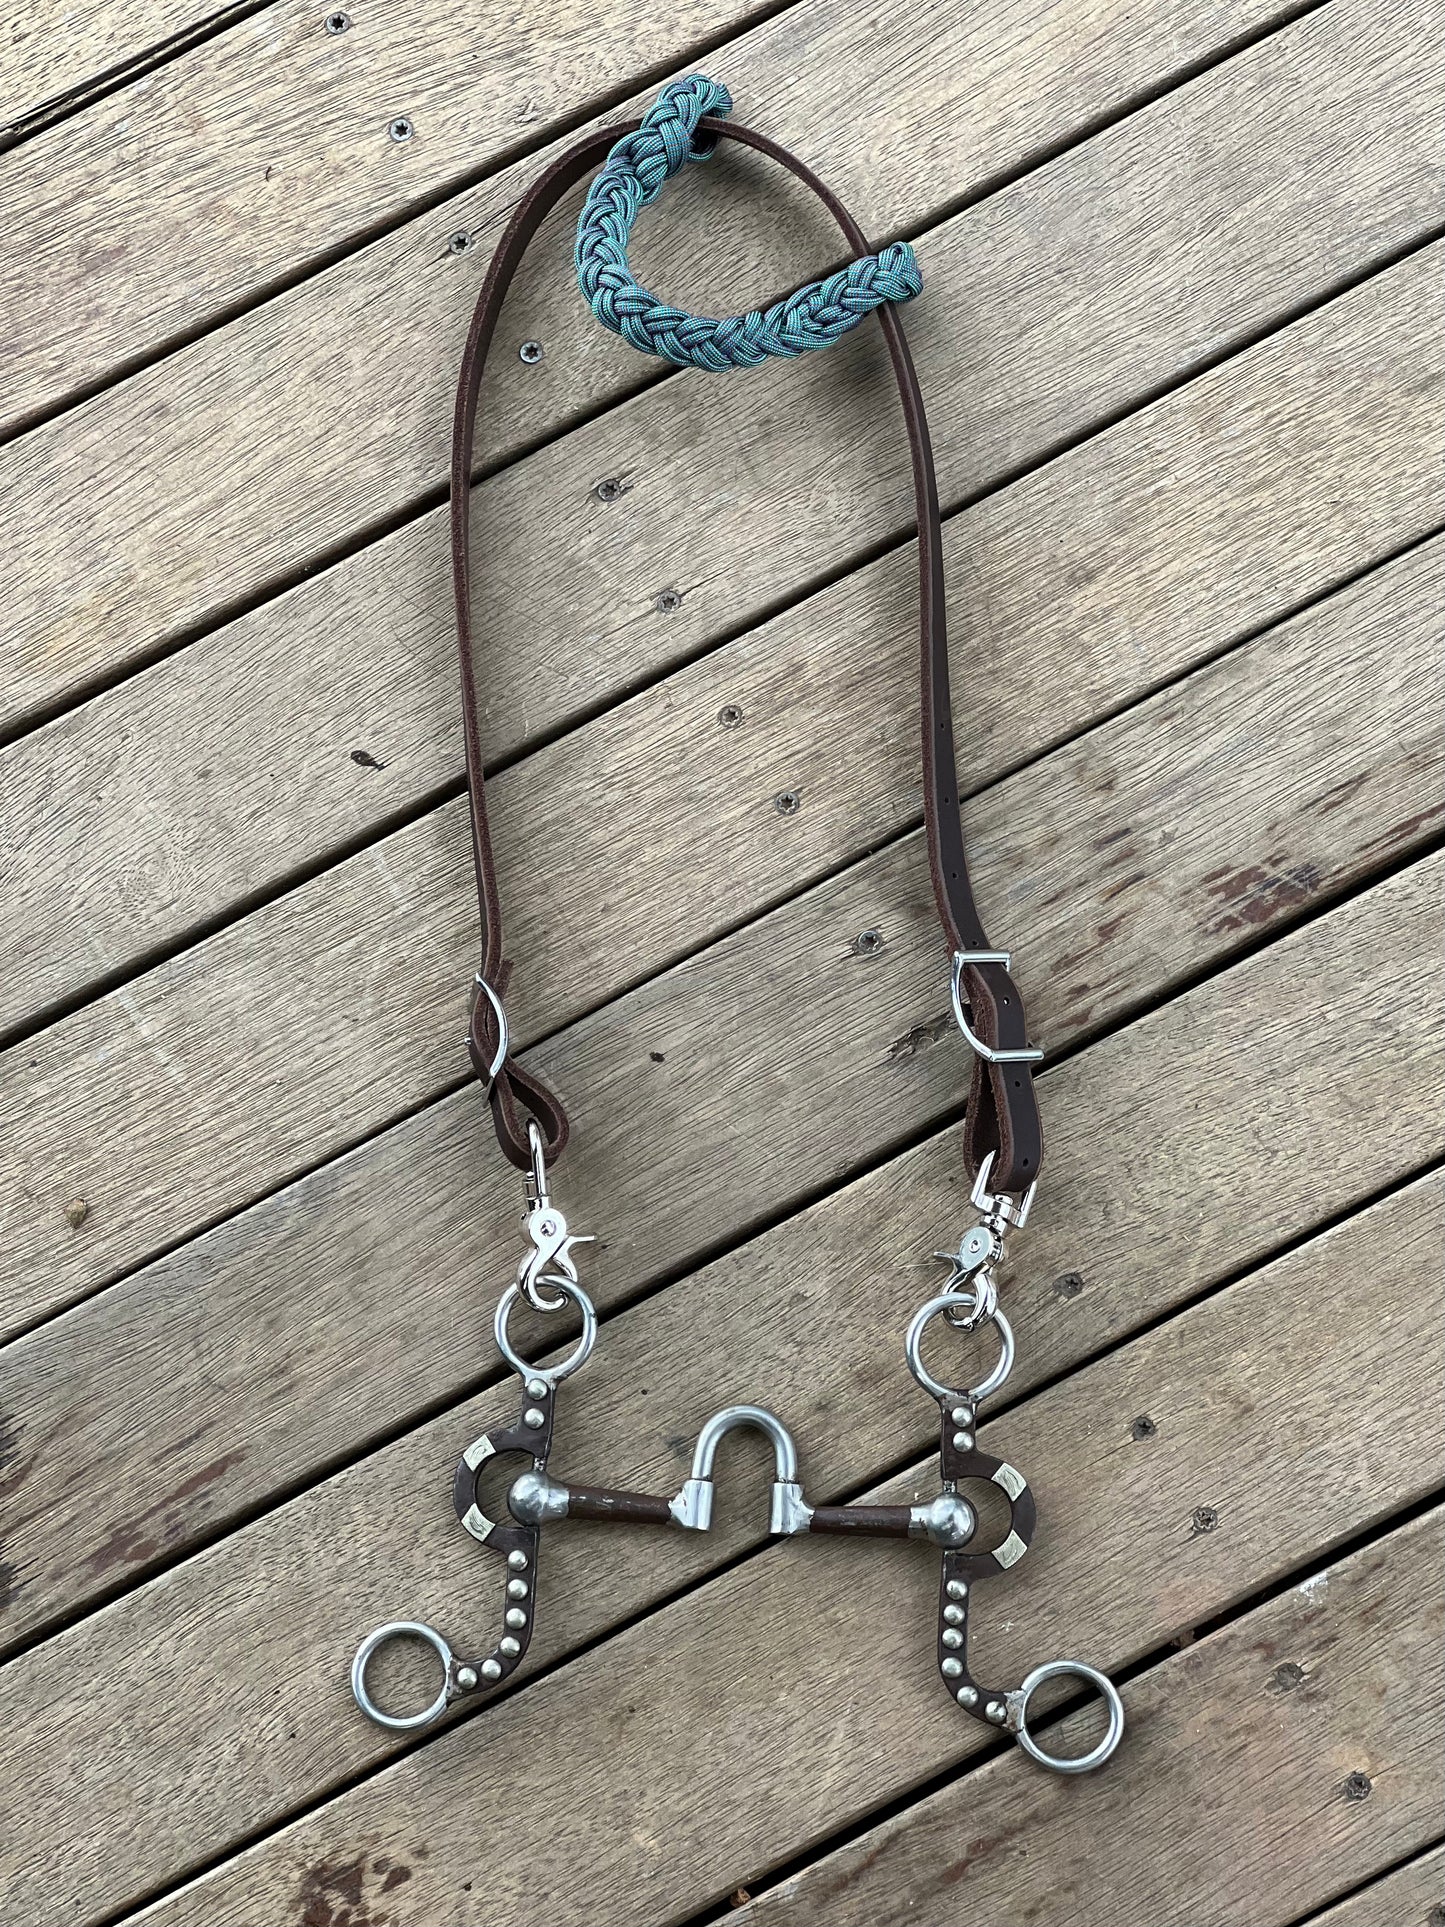 Quick Switch Bridle - Chance